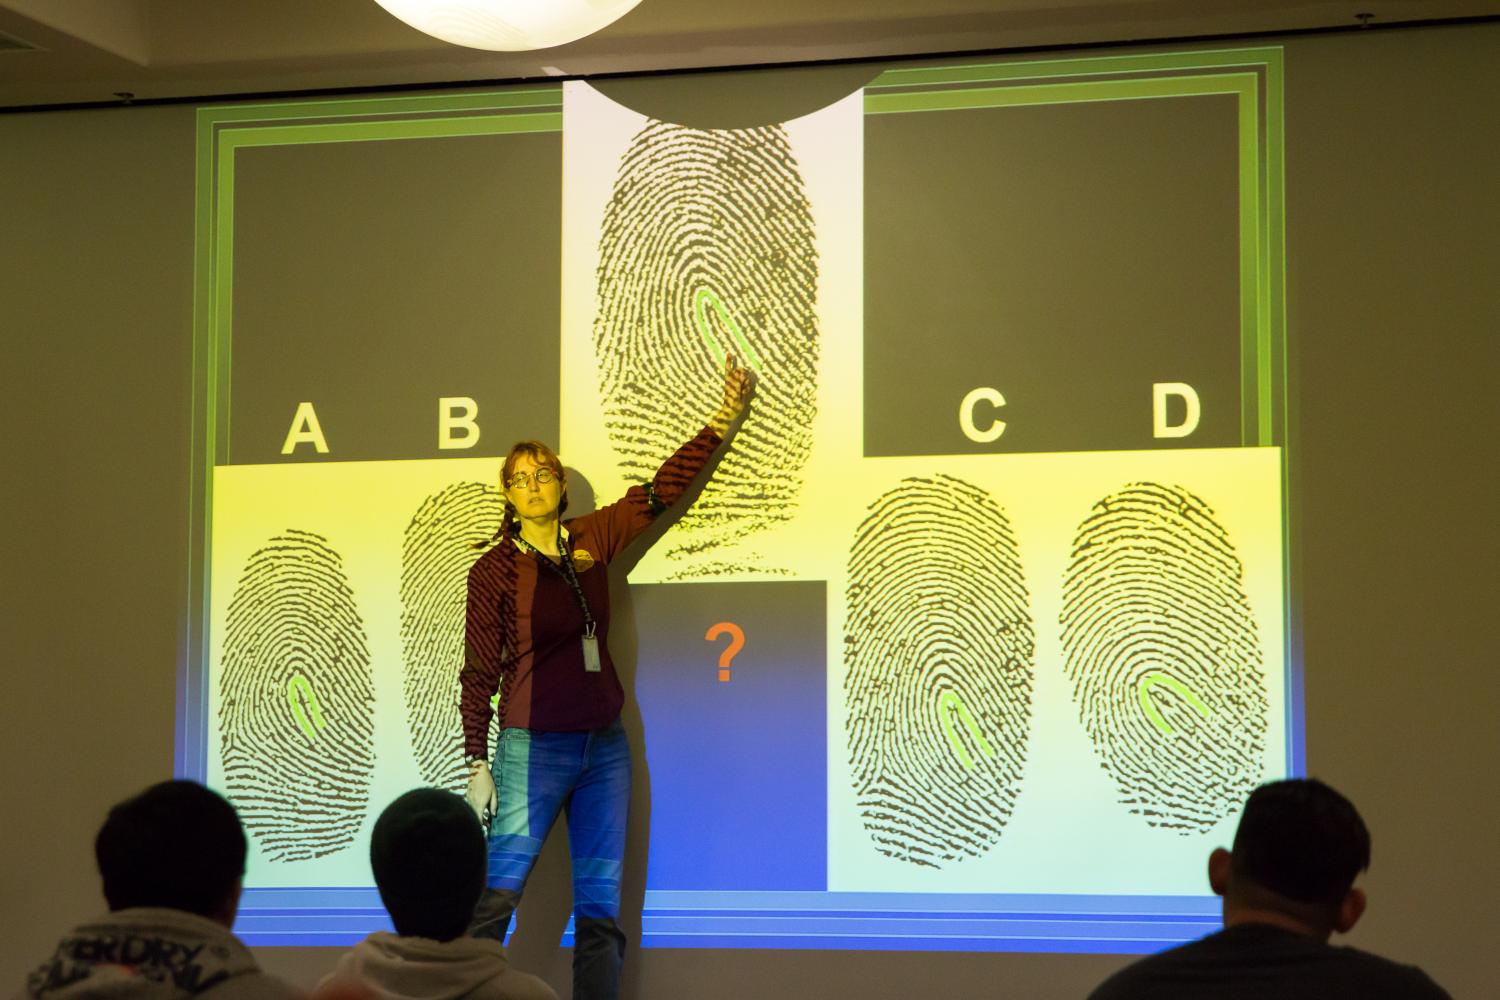 Willis shows the audience how they label evidence at a crime scene in Palo Alto, CA.